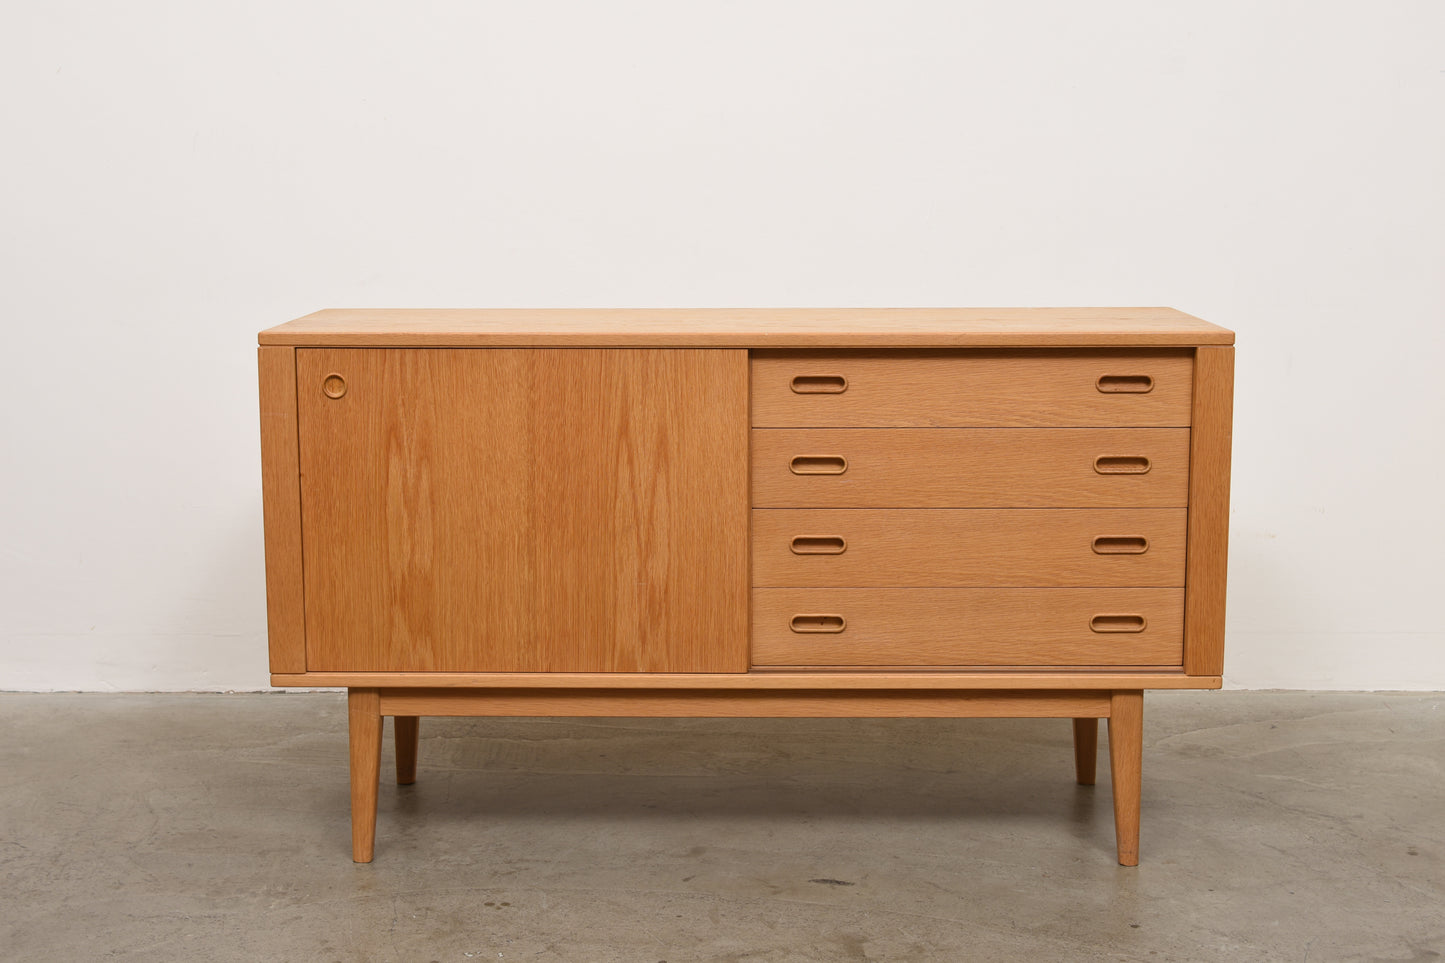 1960s oak sideboard with drawers